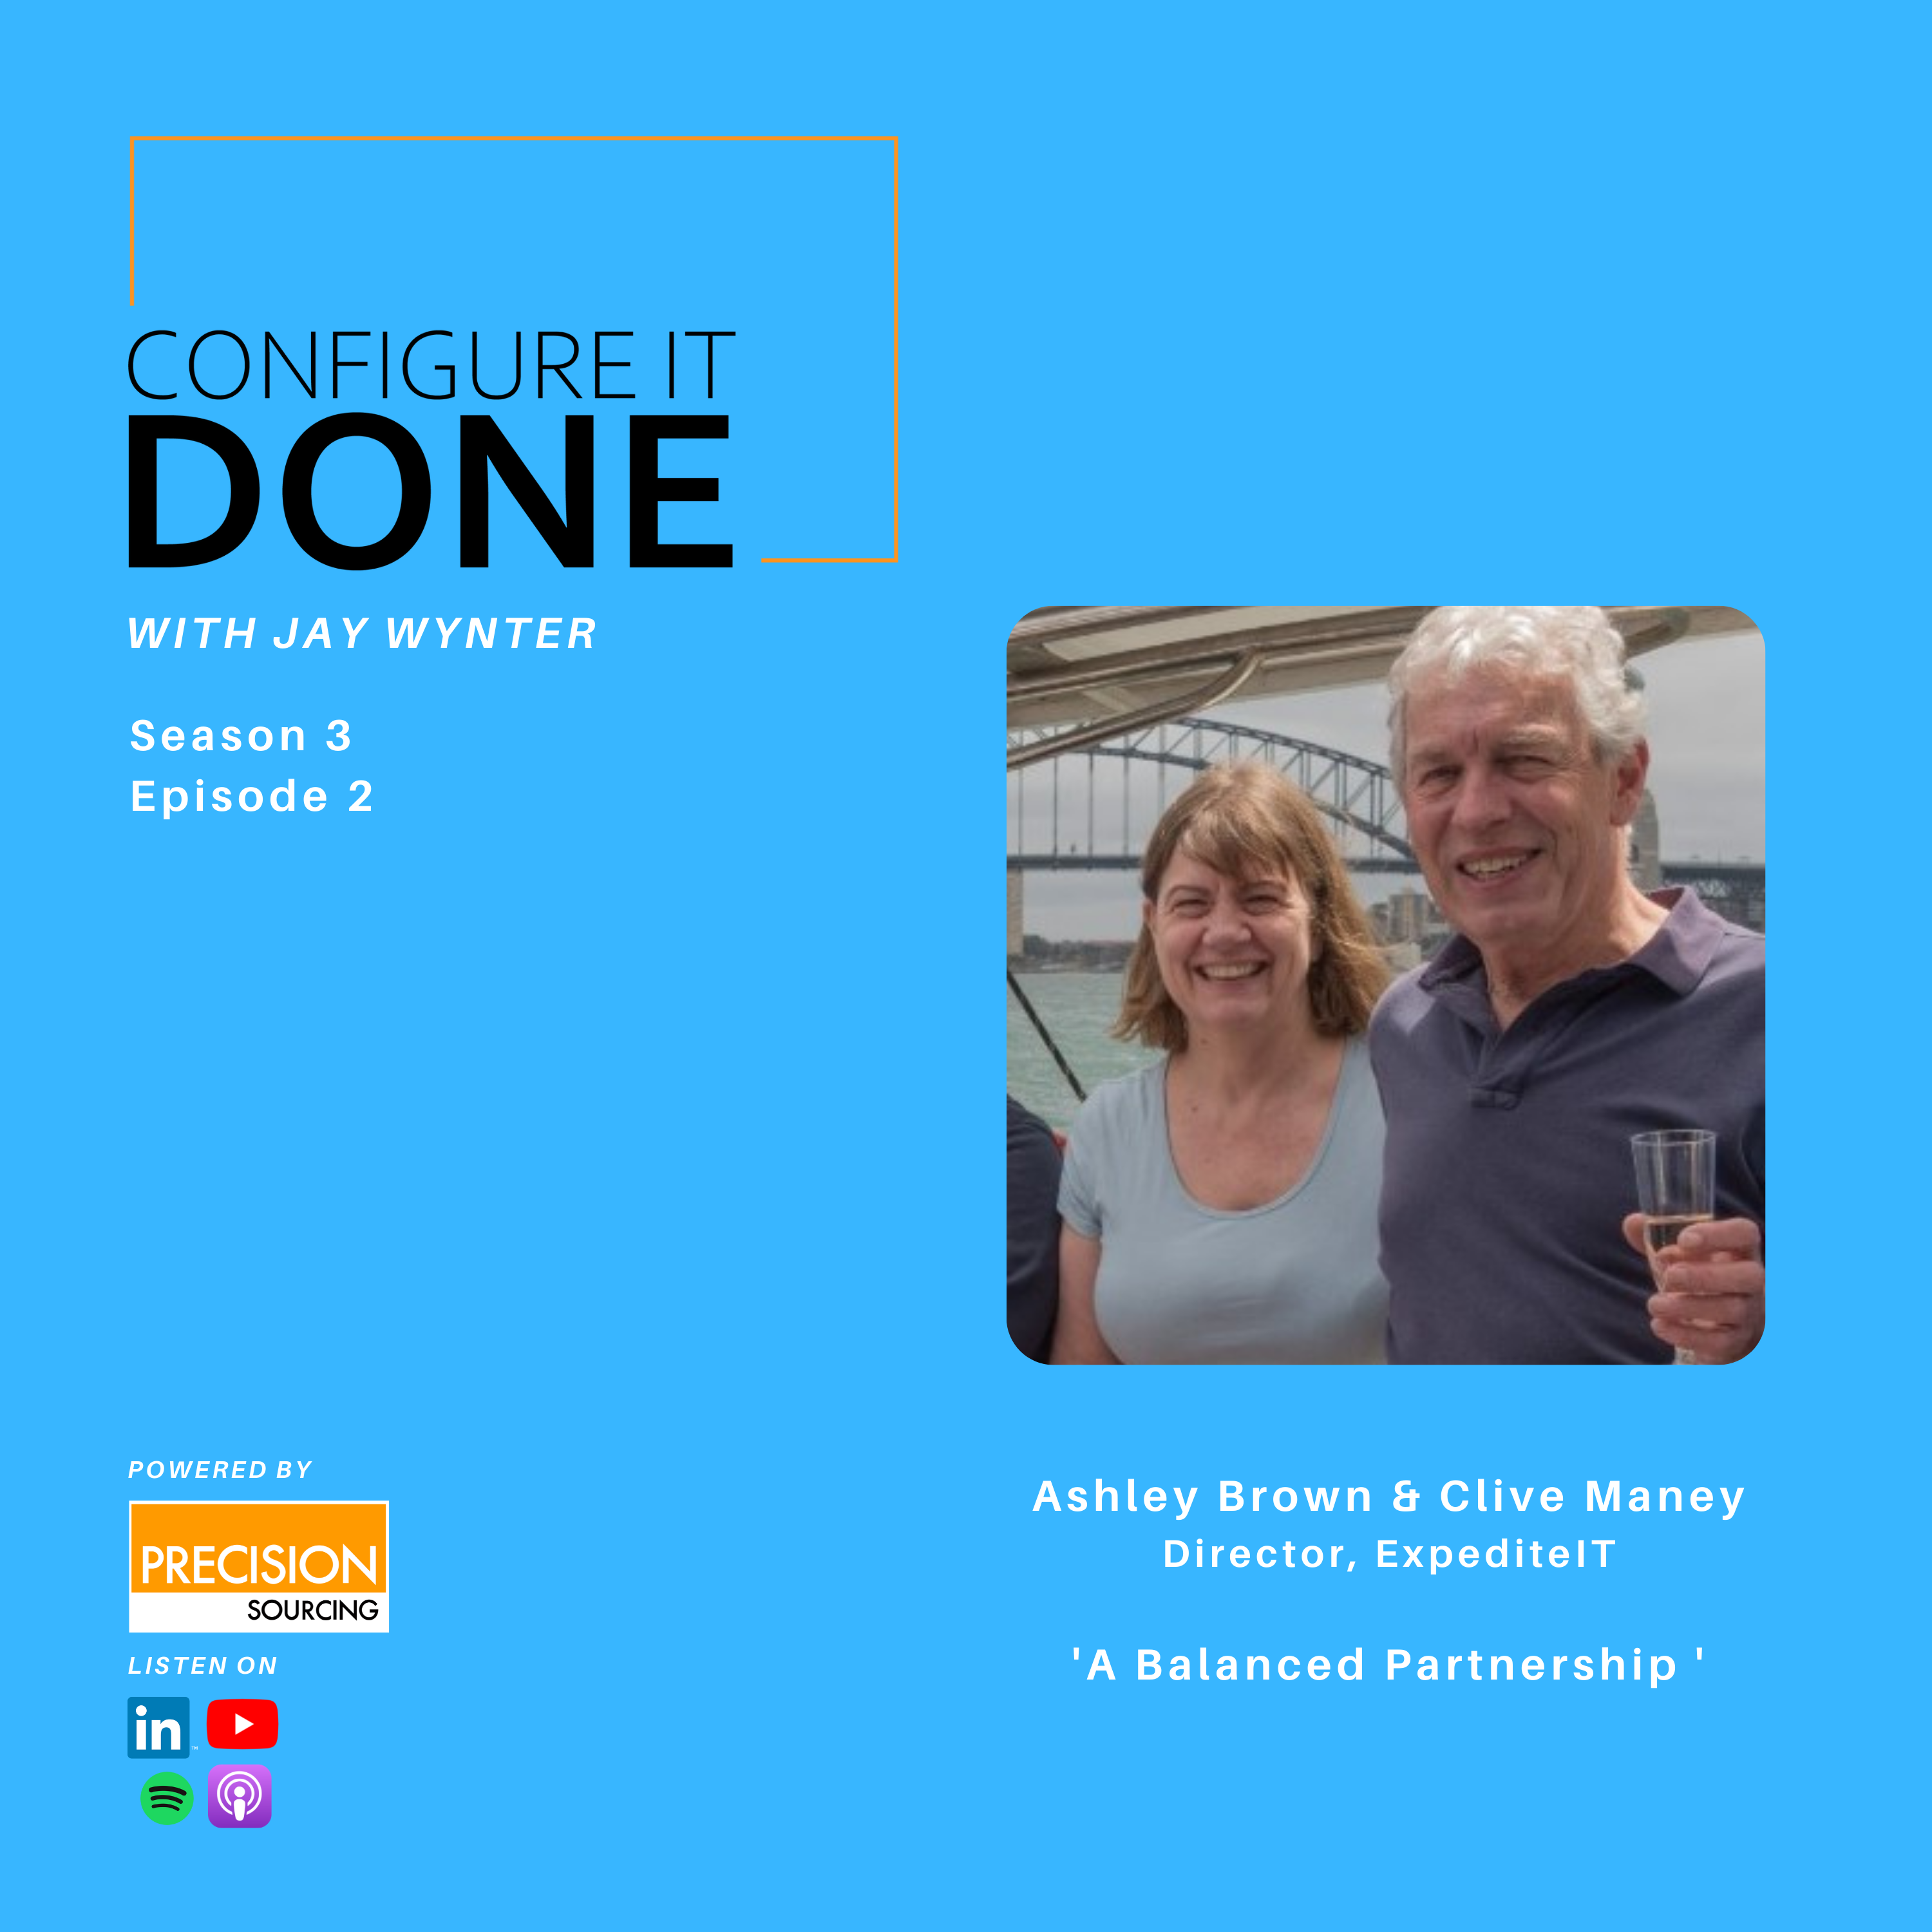 A Balanced Partnership With Clive Mancey and Ashley Brown